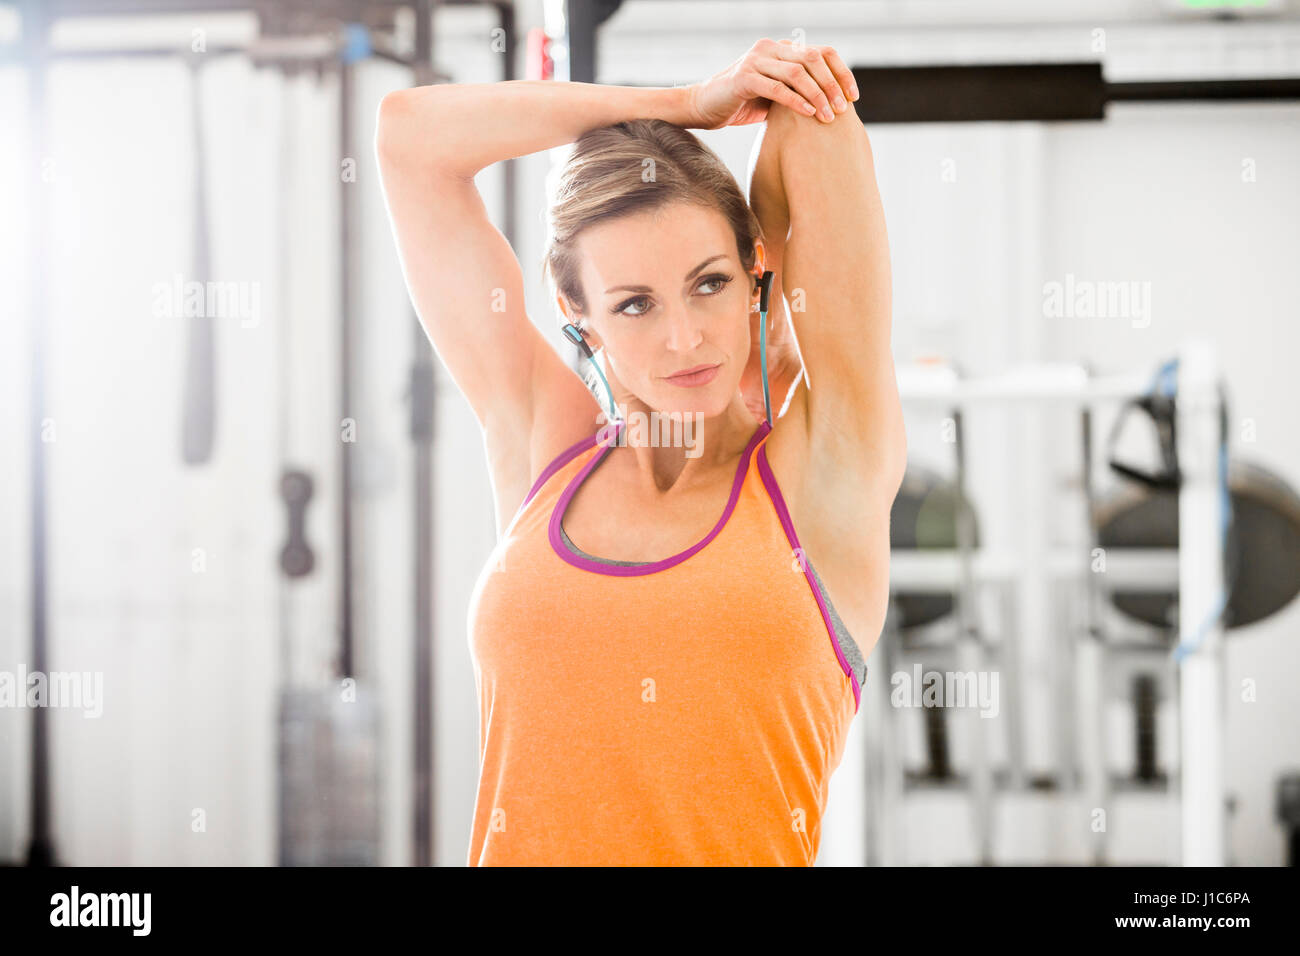 Woman stretching arm in gymnasium Banque D'Images